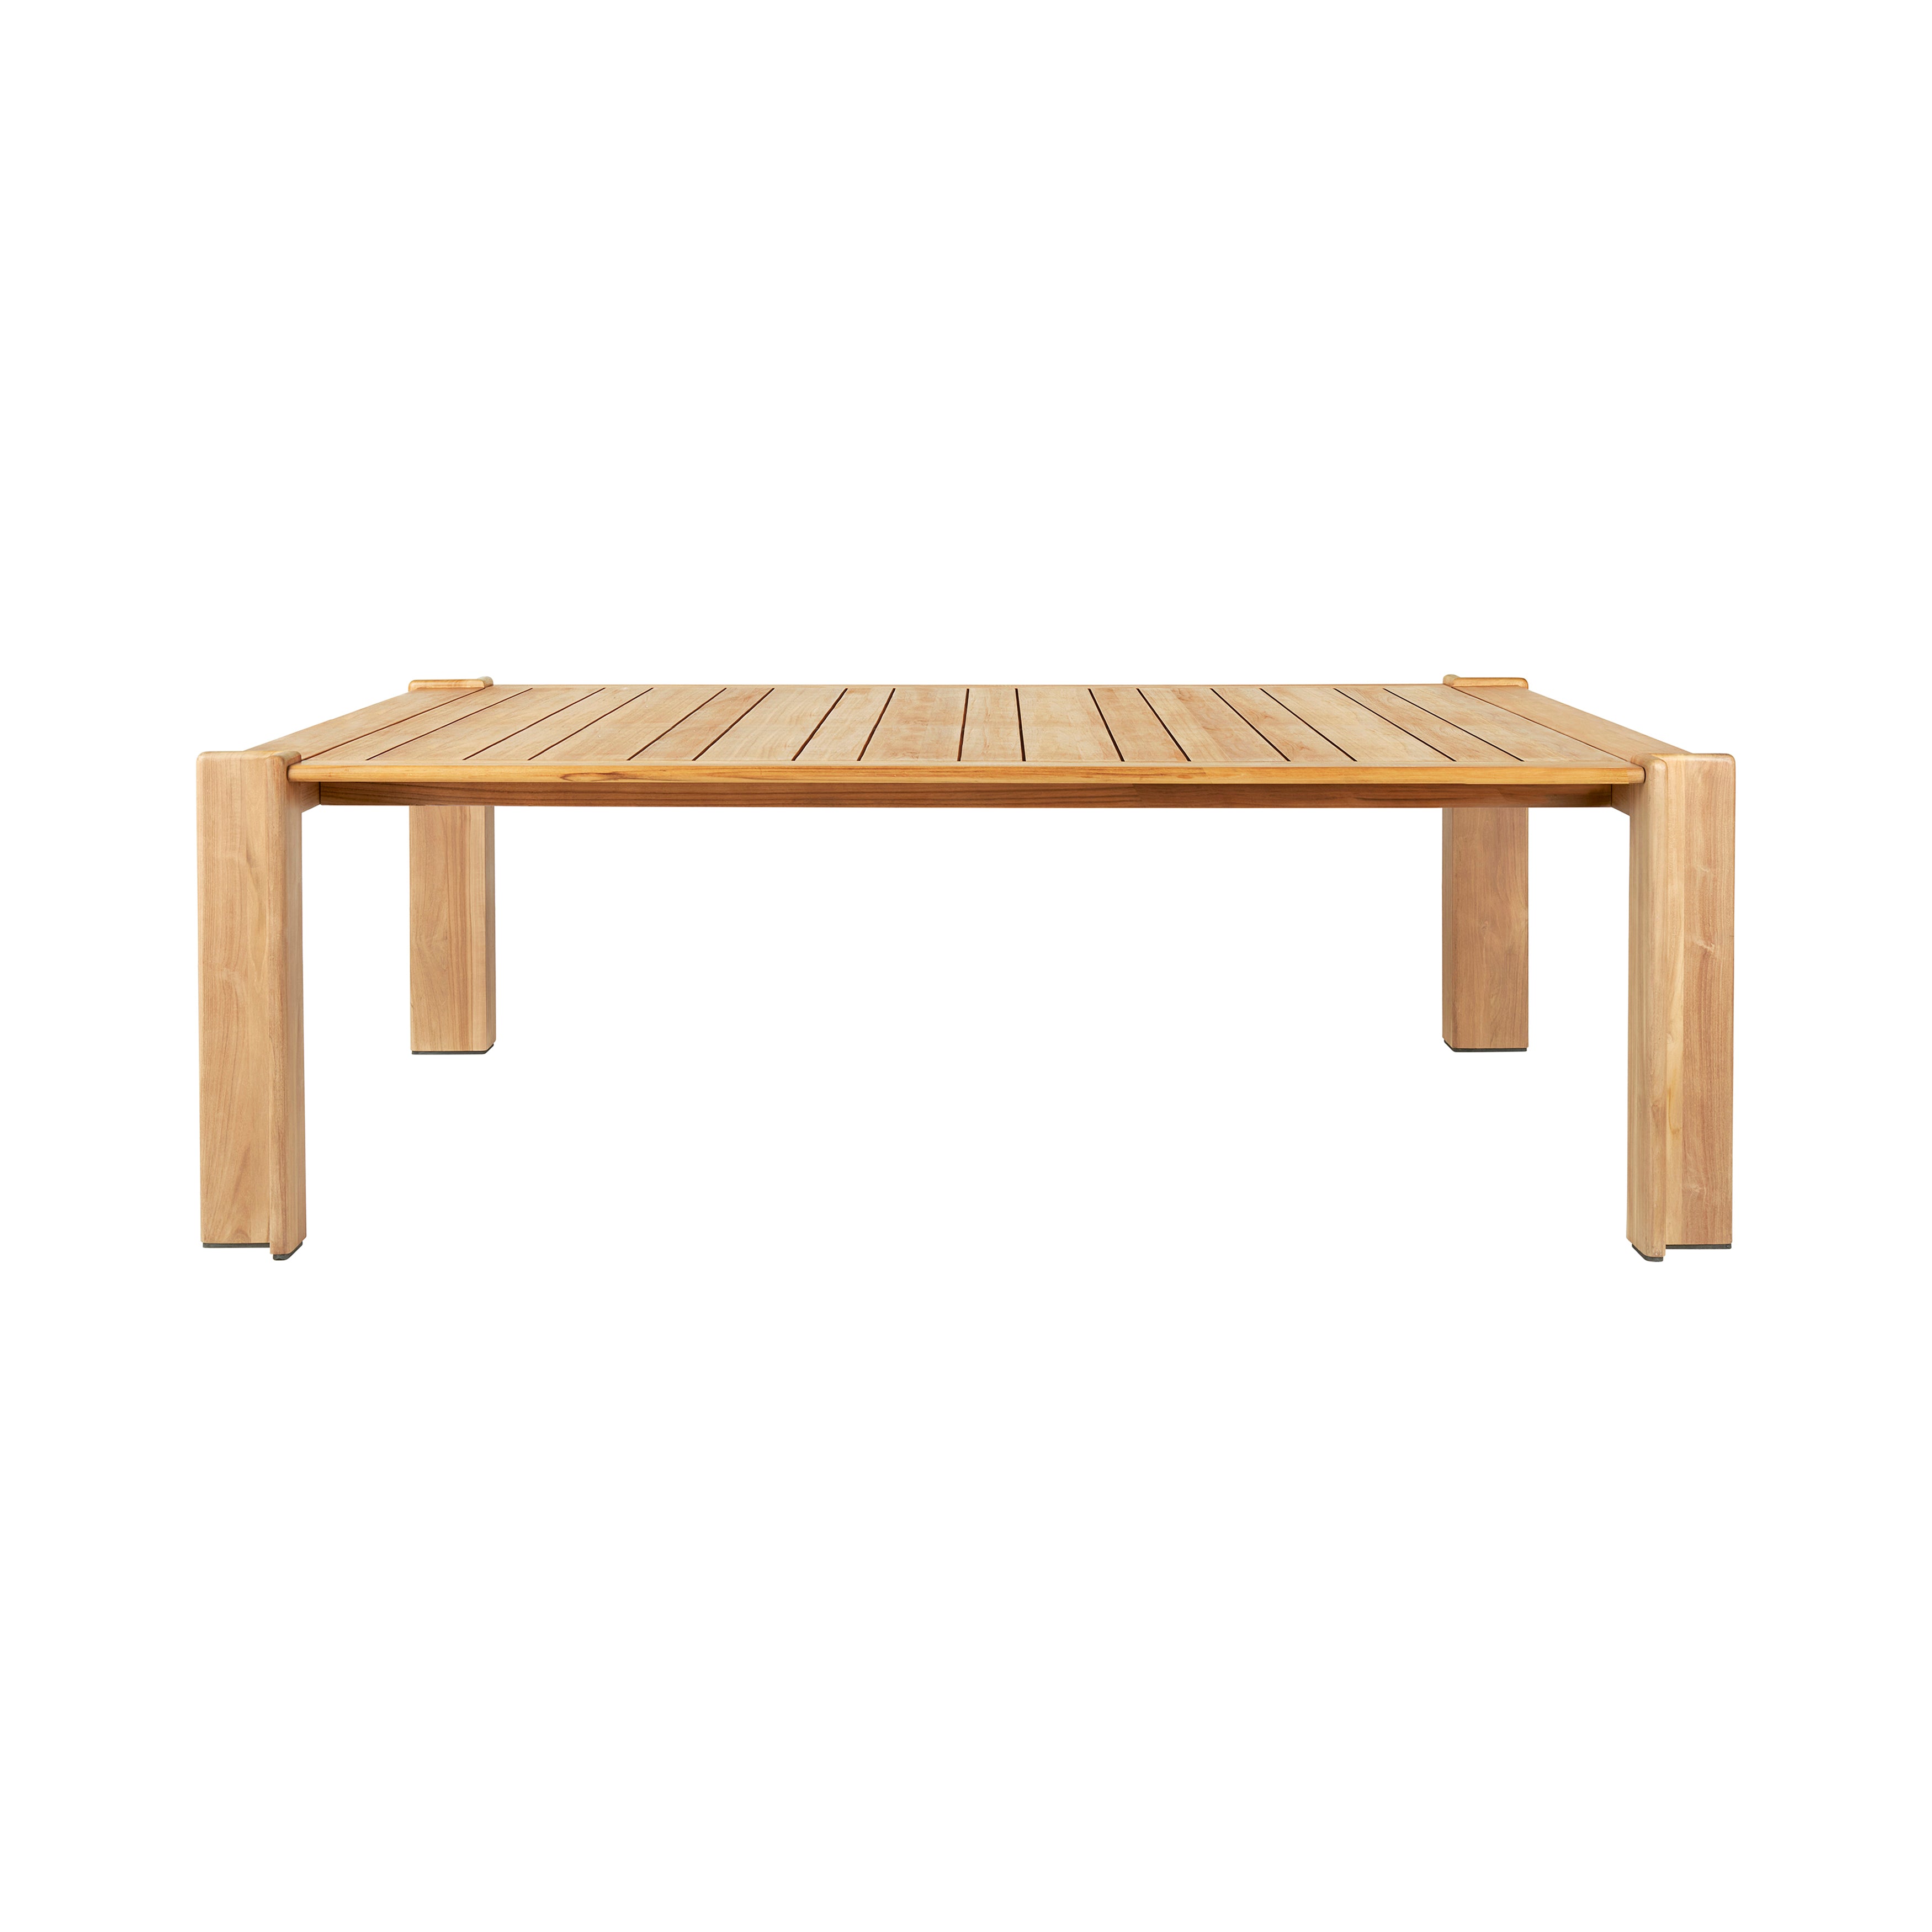 Atmosfera Dining Table: Outdoor + Small - 82.3